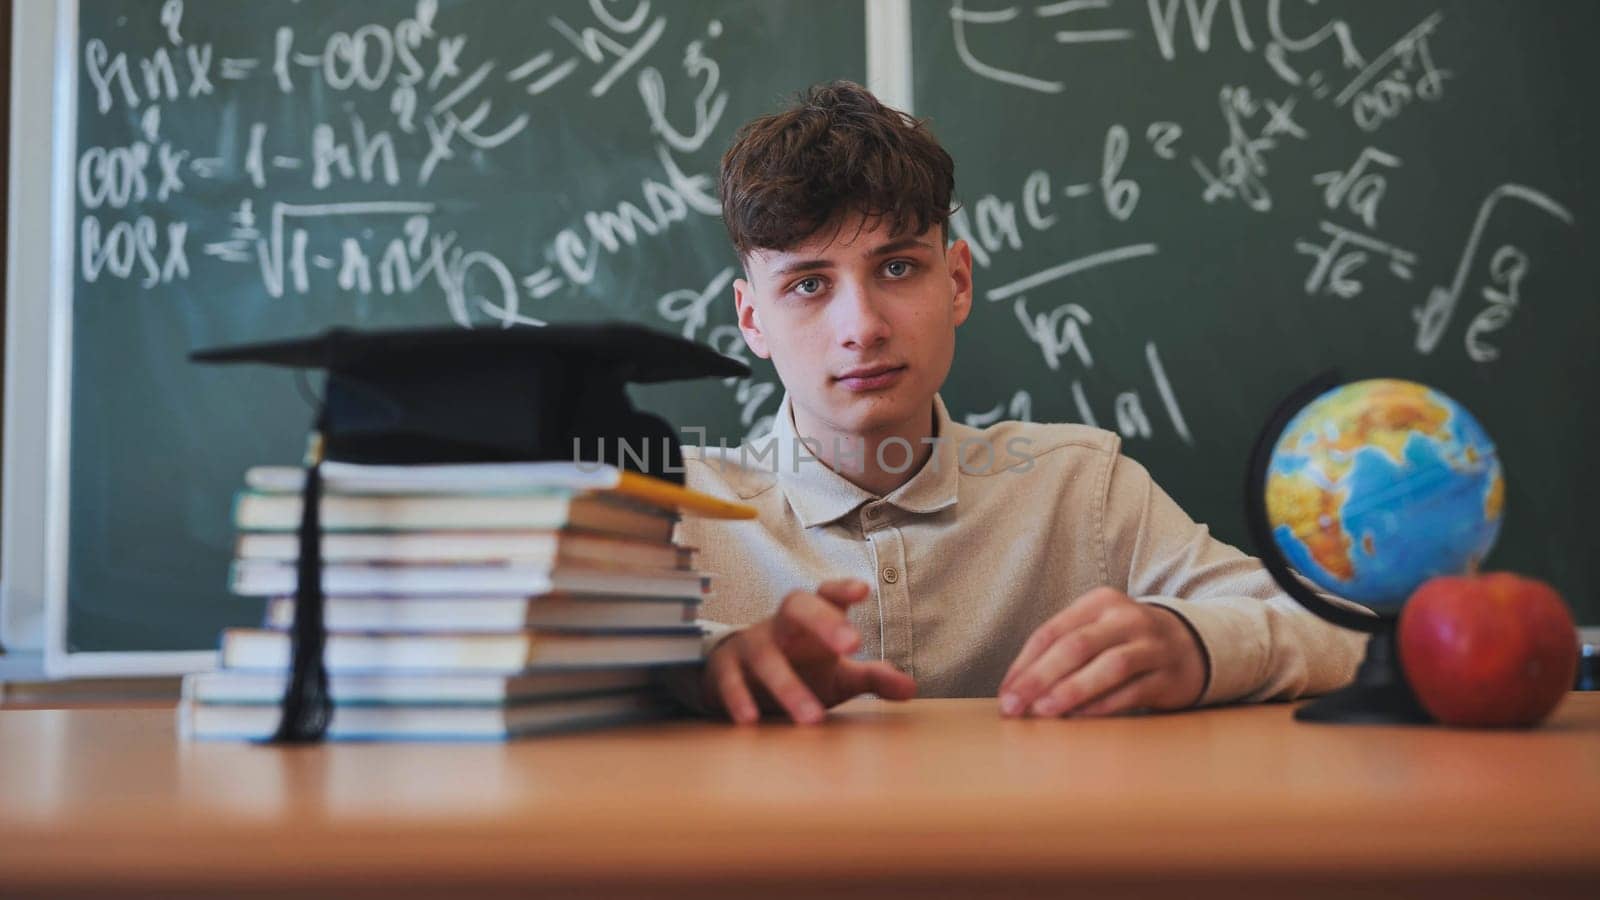 Portrait of a high school student against a background of blackboard, globe and books with cap. by DovidPro